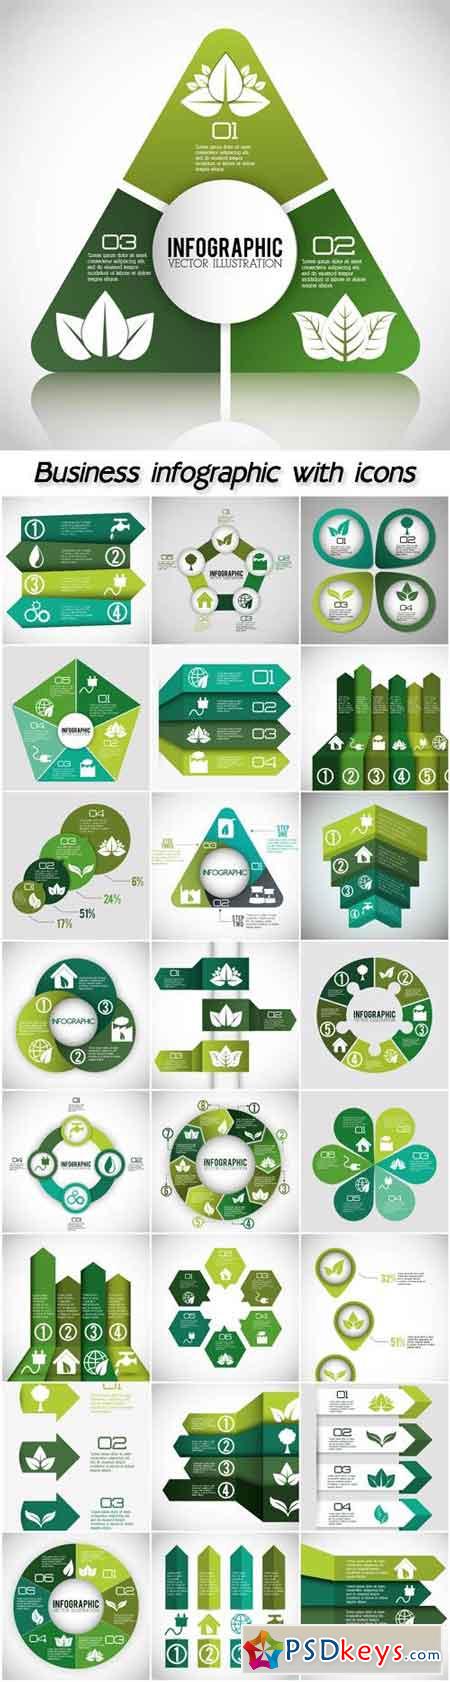 Business infographic with icons